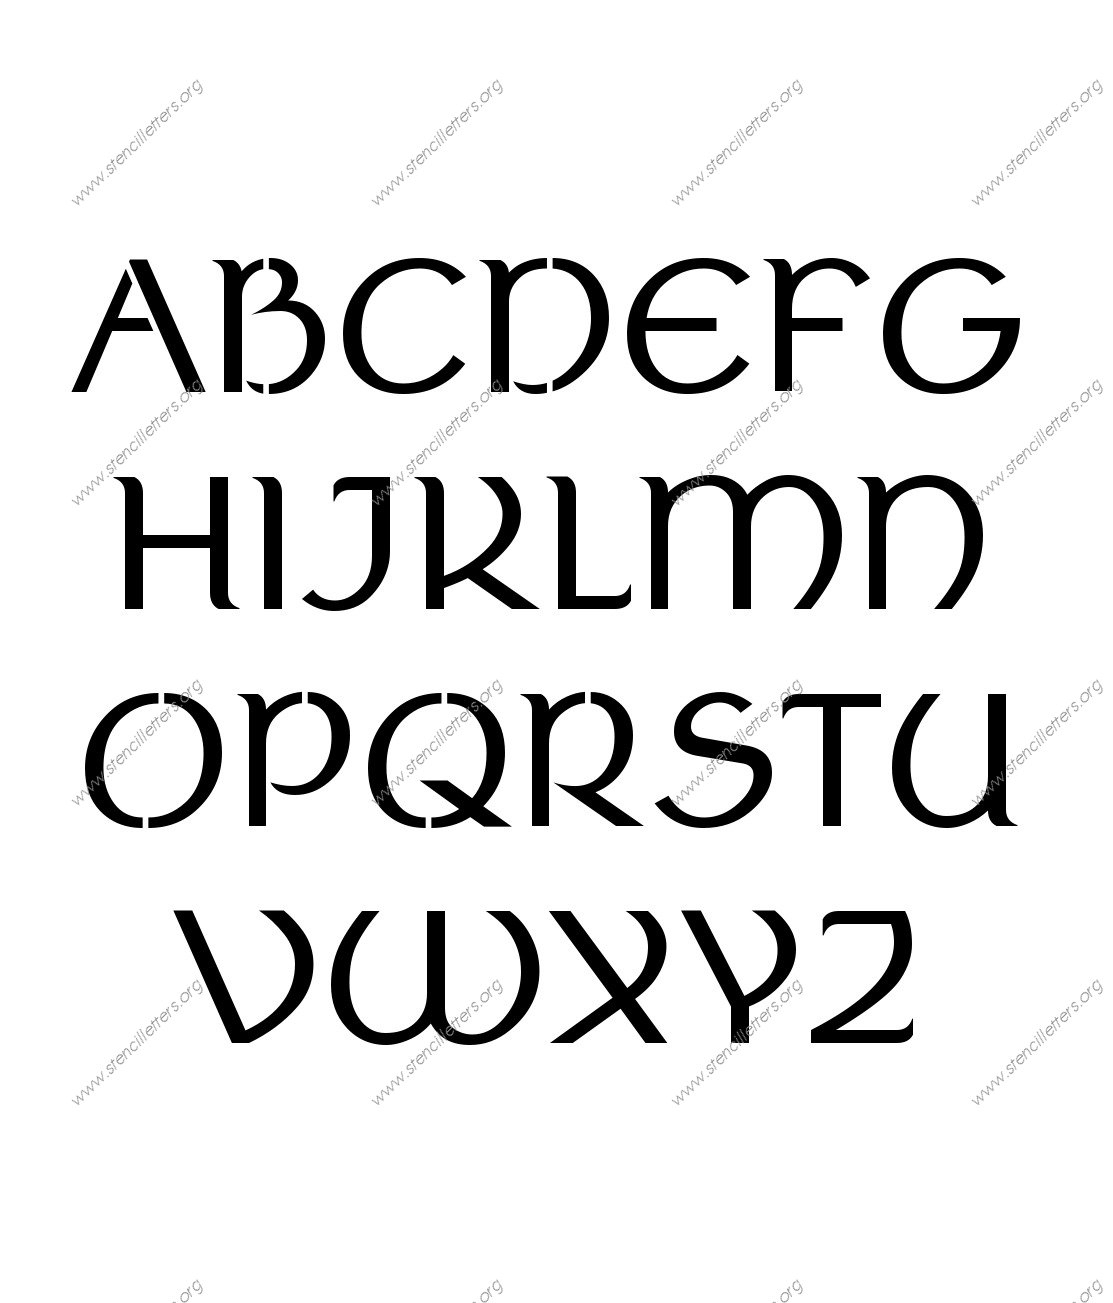 Ancient Celtic Made To Order Stencils - Stencil Letters Org - Free Printable Celtic Stencils